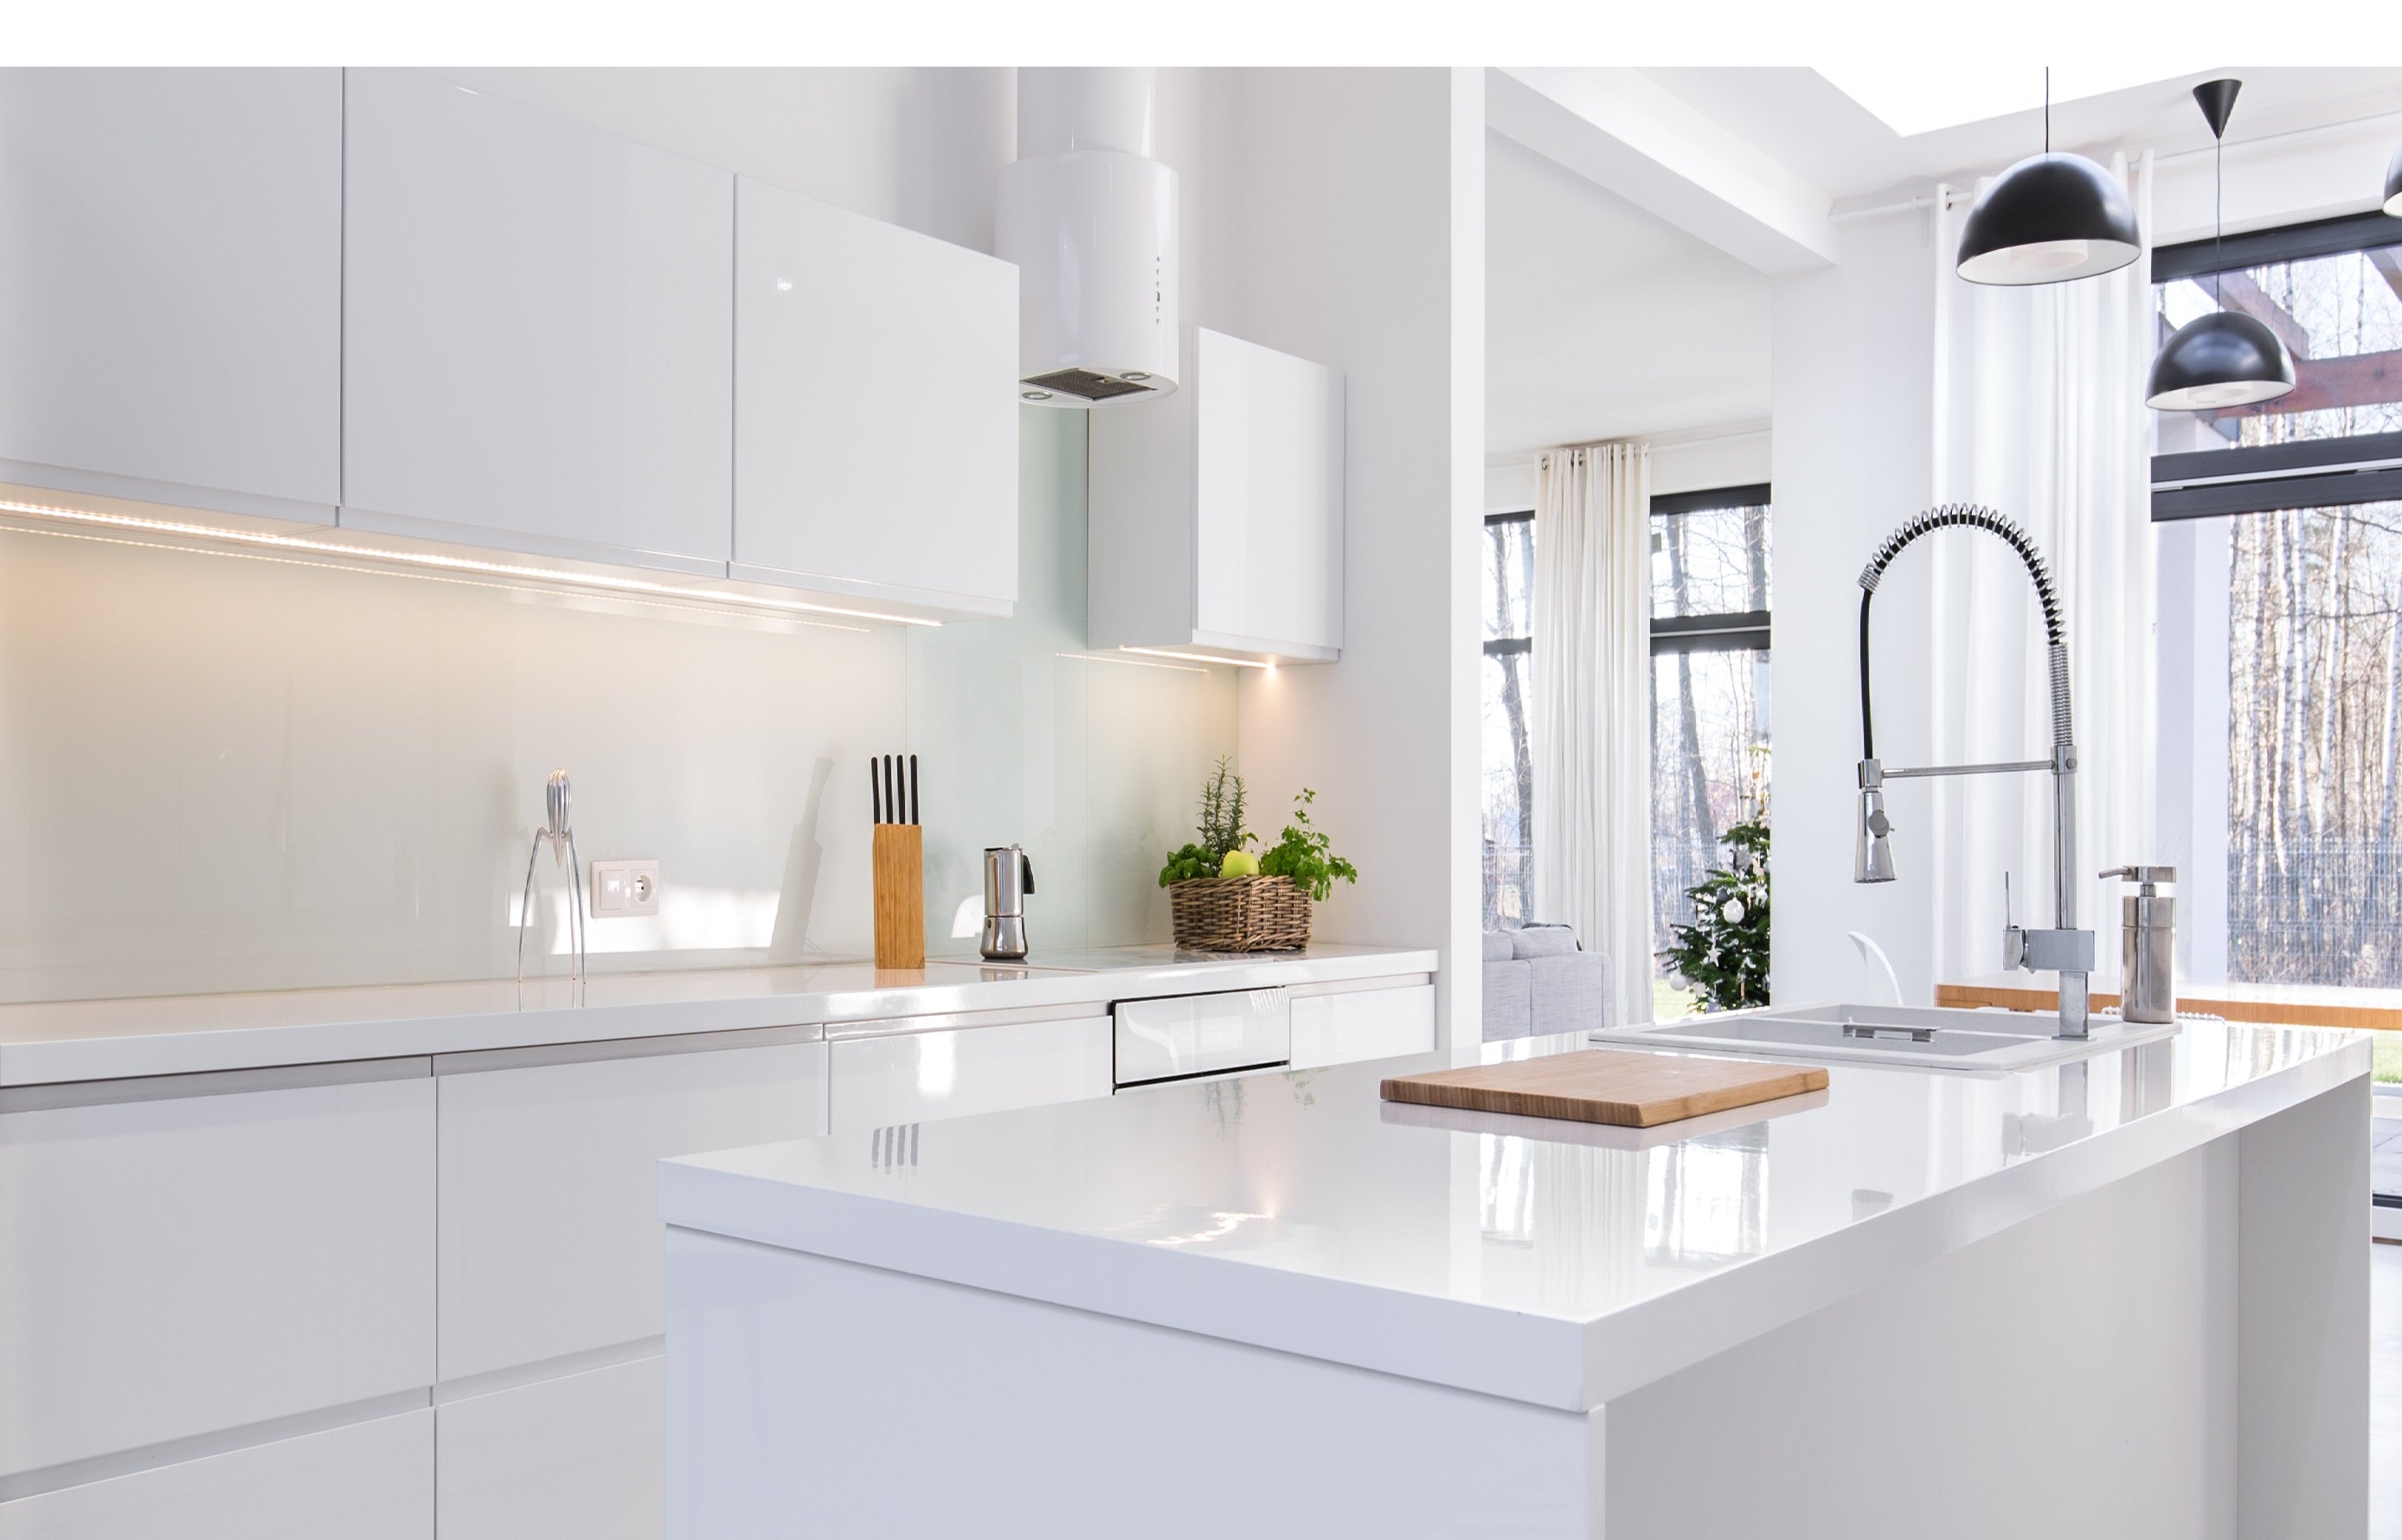 TOP 6 Reasons That Will Make You Fall In Love With 2021 Kitchen Design Trends III